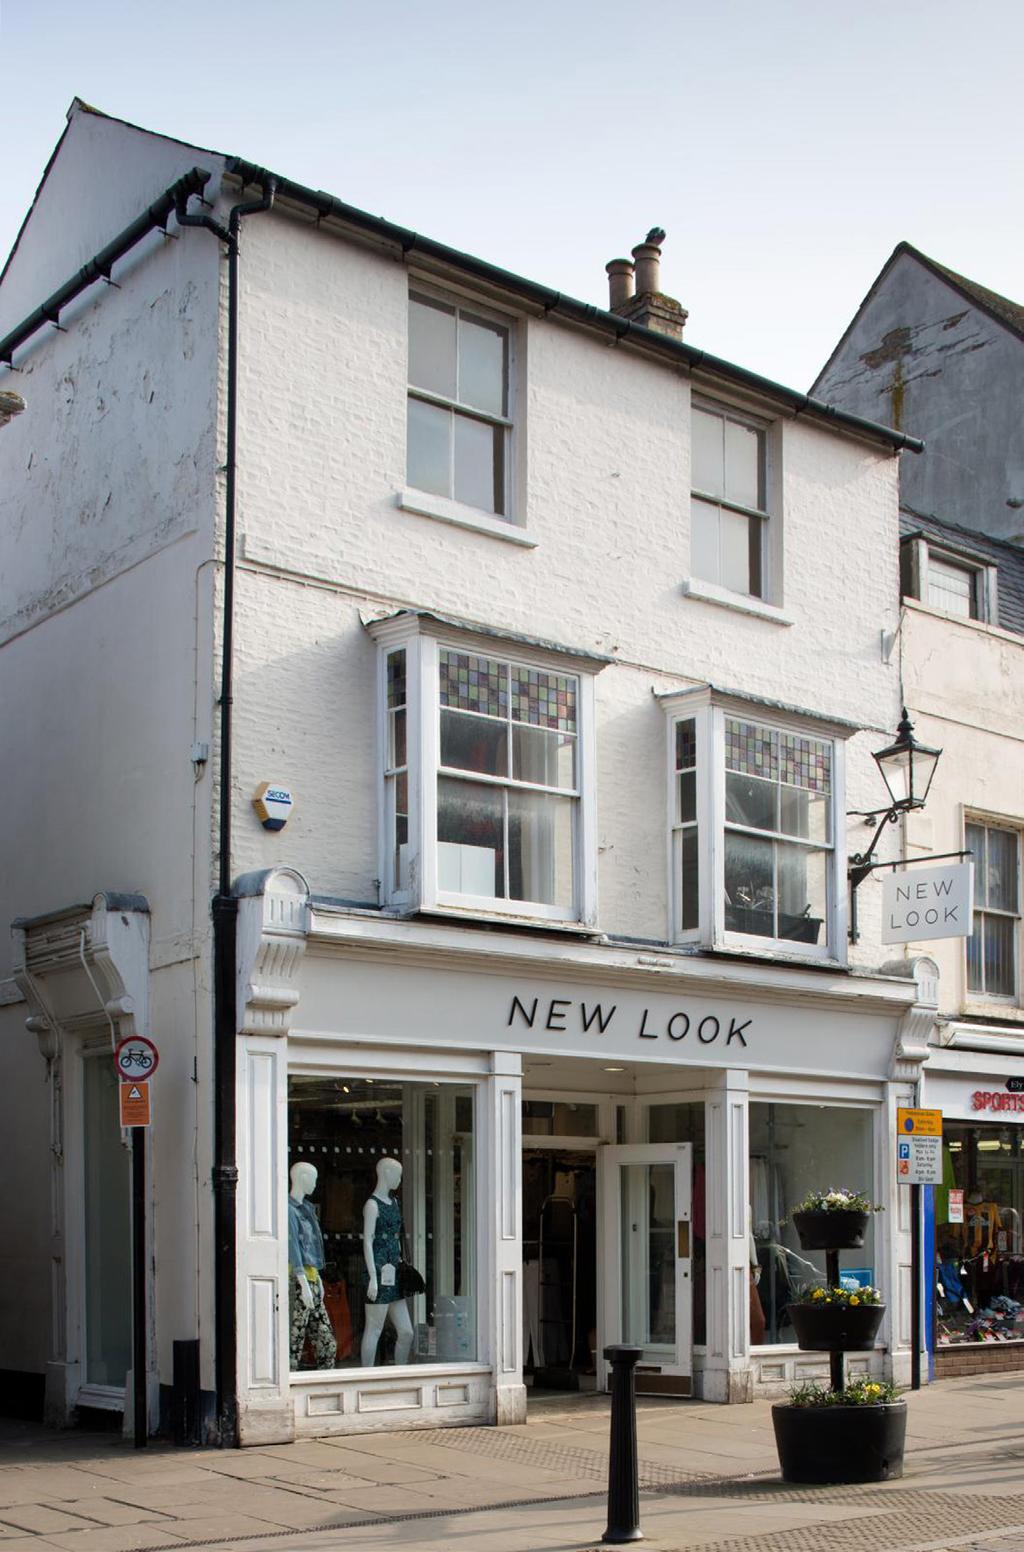 33 HIGH STREET, ELY; NEW LOOK As part of the Early Fabric in Historic Towns: Ely project 33 High Street, Ely was visited and surveyed on the 16 October 2014 by Rebecca Lane and Katie Carmichael,